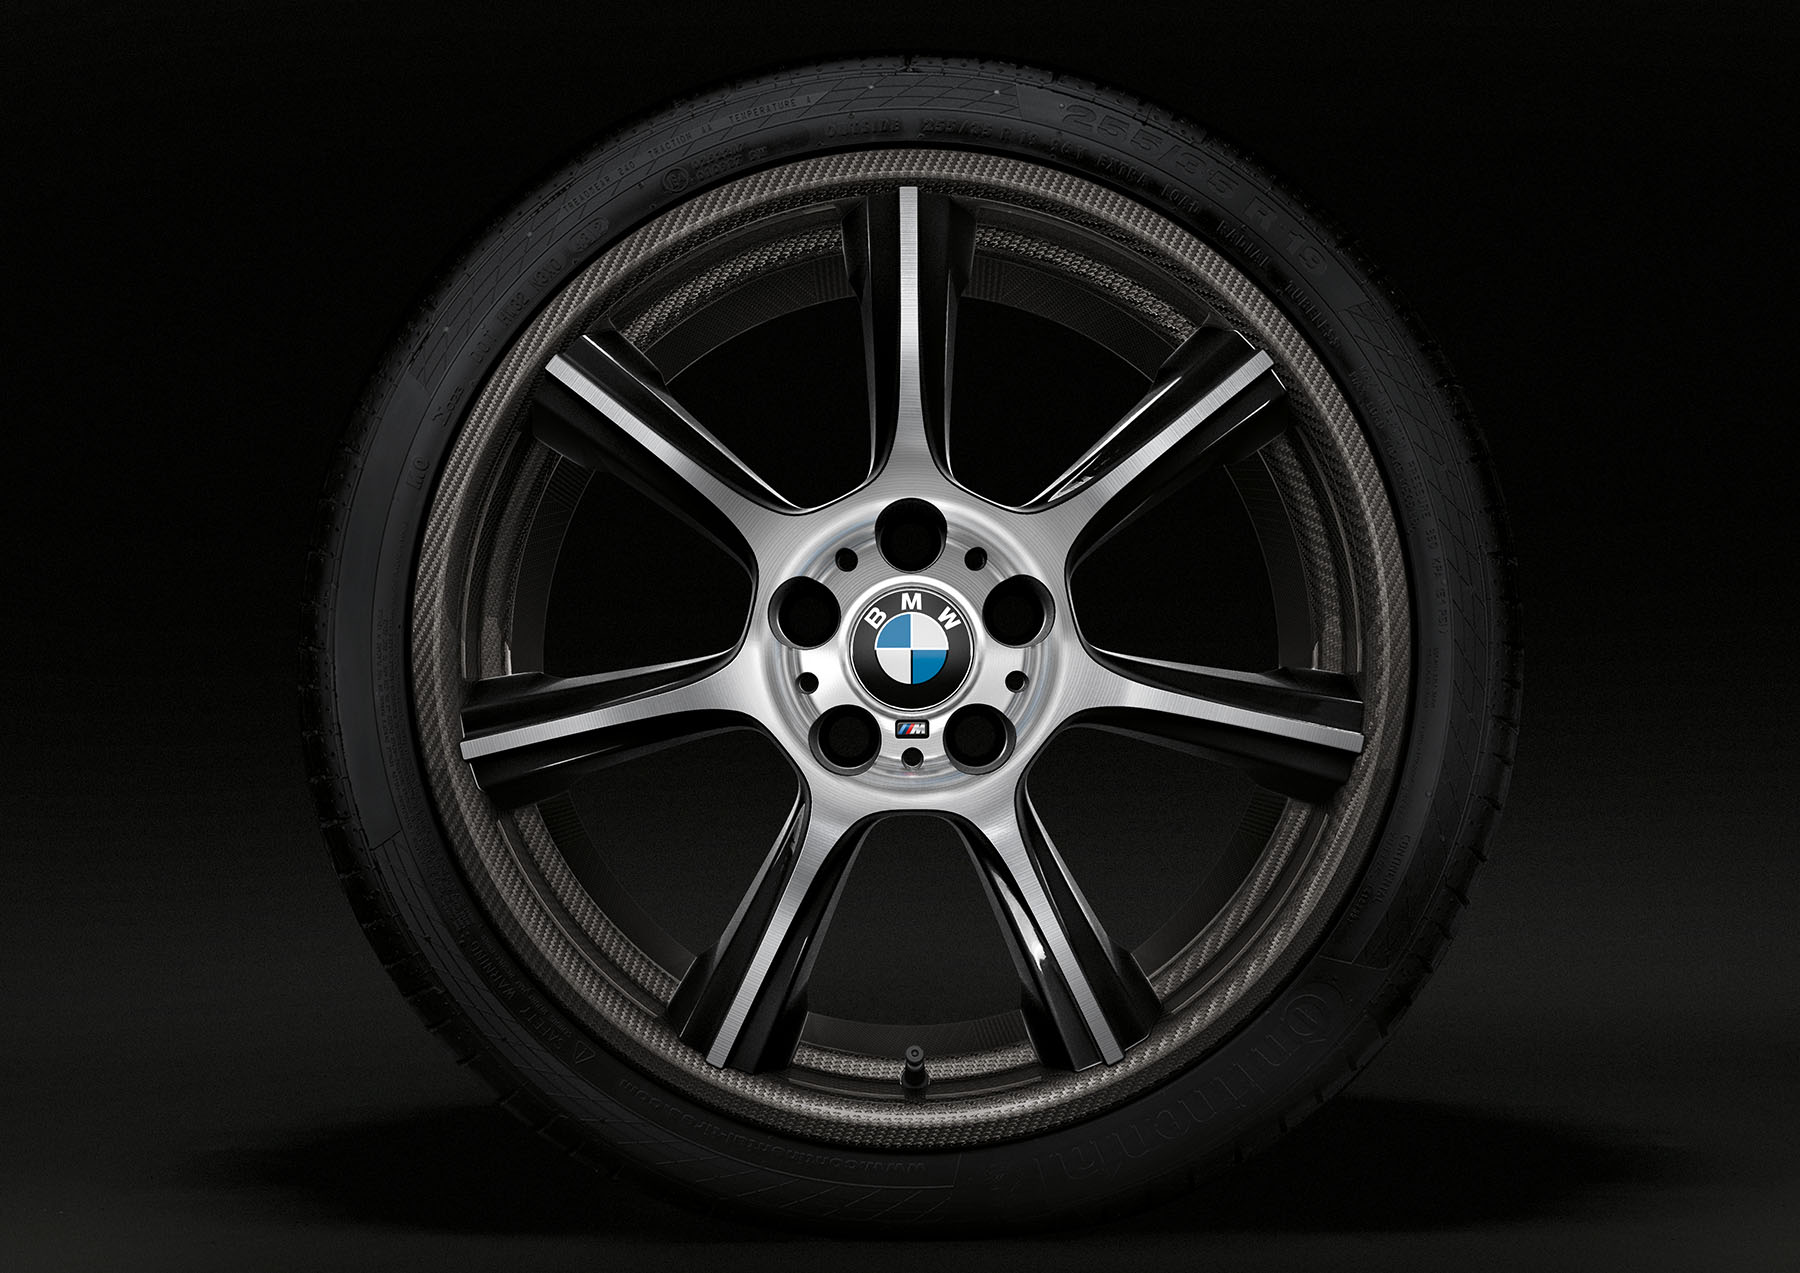 US: BMW M4 GTS Will Be Equipped with M Carbon Compound Wheels